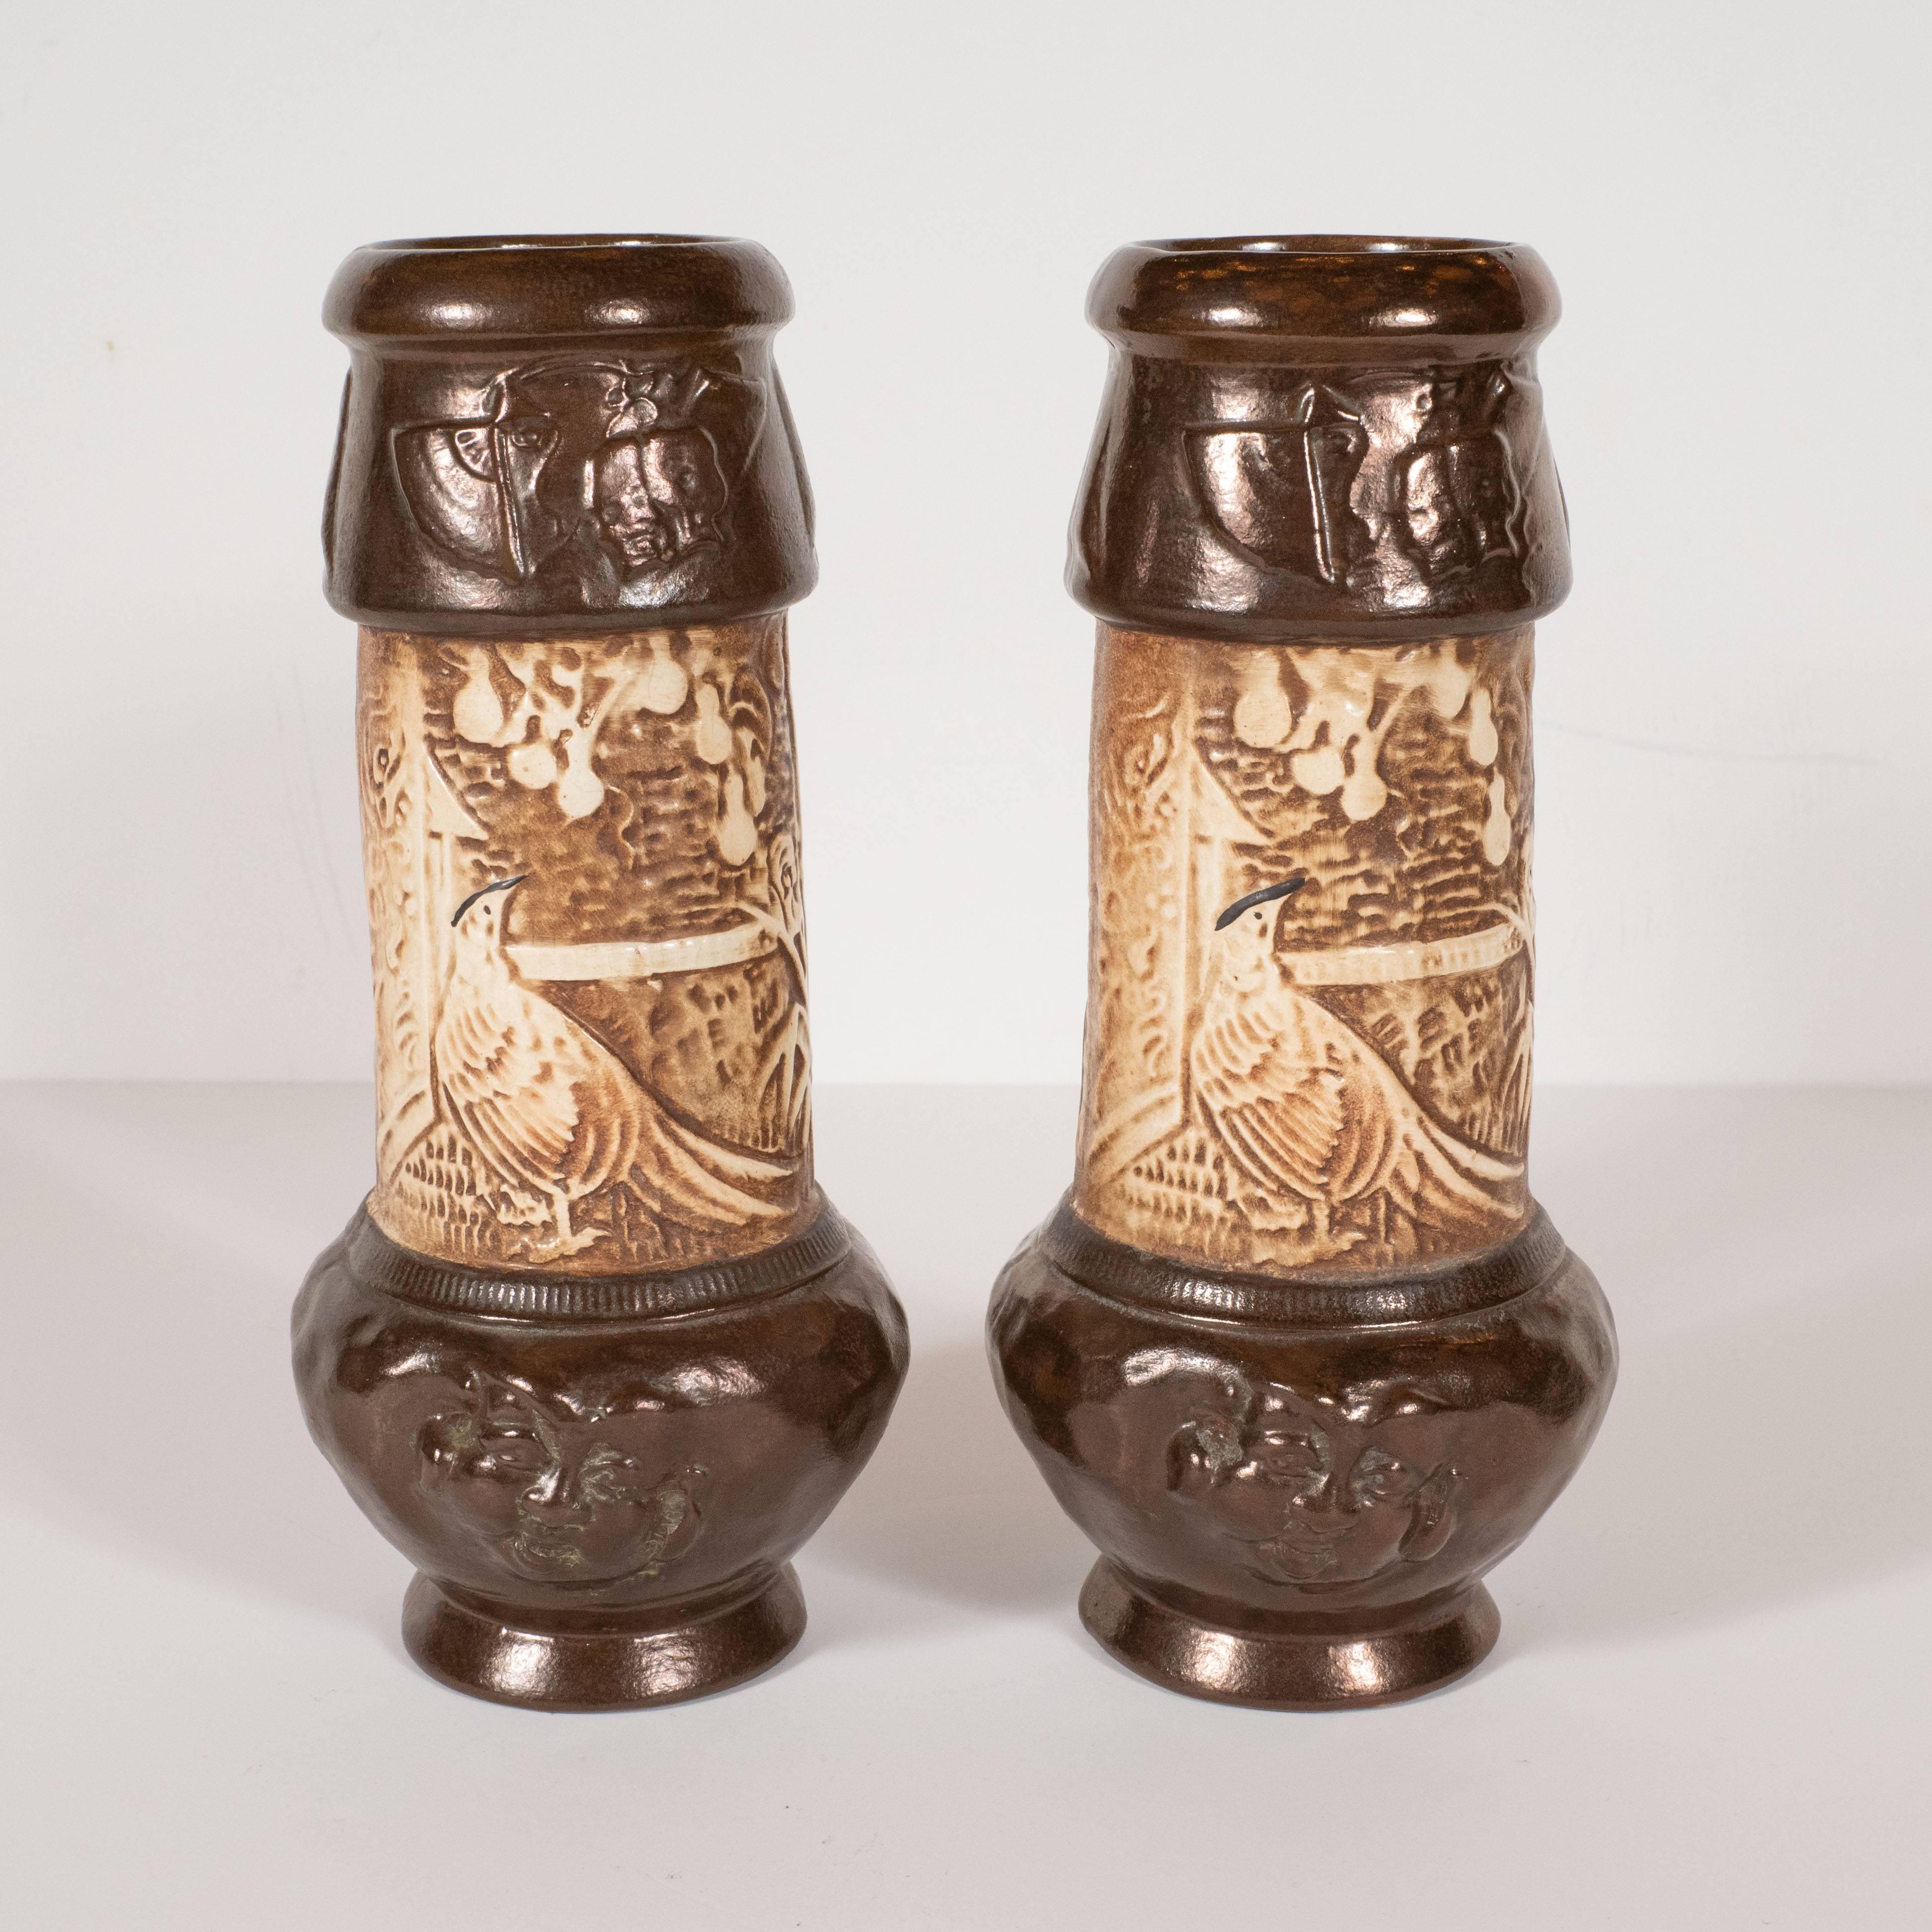 This sophisticated pair of hand-painted ceramic vases were realized by the esteemed British early 20th century pottery studio, Bretby. Hand-painted in dark chocolate and cream tones, they feature whimsical interpretations of orientalist motifs-